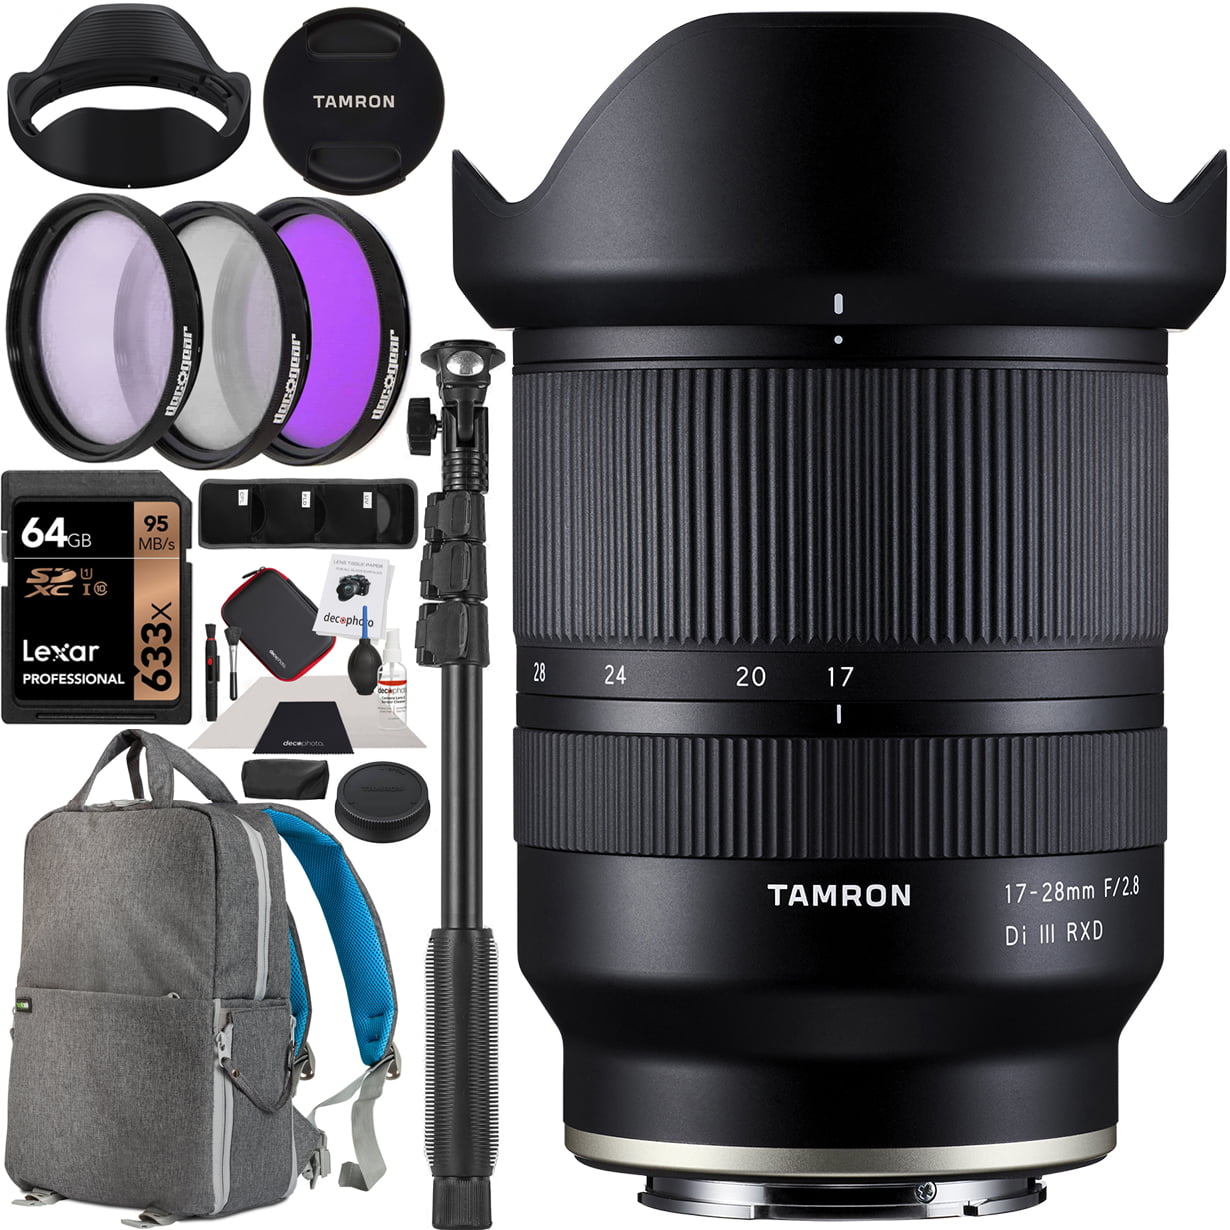 Tamron 17-28mm F/2.8 Di III RXD Full Frame E-mount Lens (A046) for Sony  Mirrorless Cameras Bundle with Deco Gear Photography Backpack Case + 67mm 